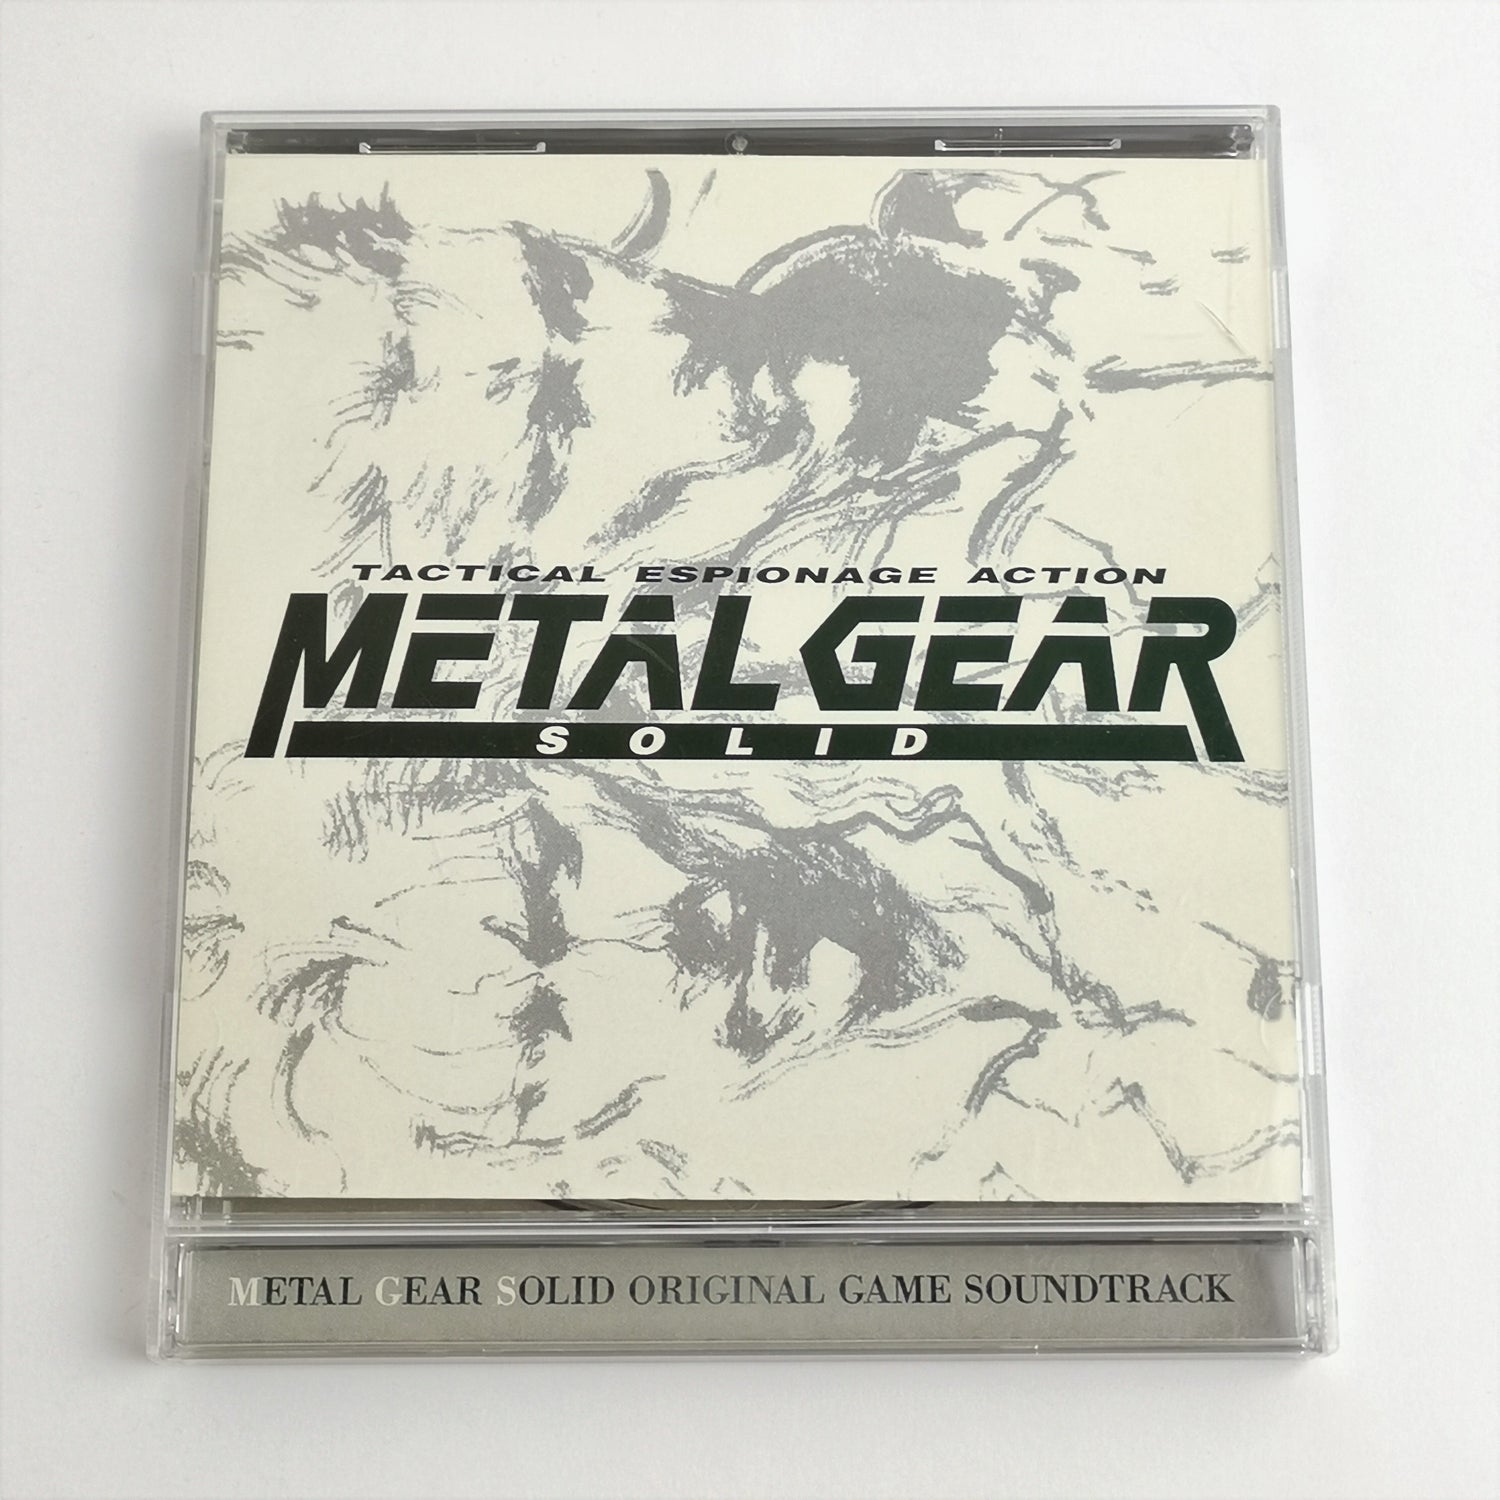 Audio soundtrack CD for the game: Metal Gear Solid - PS1